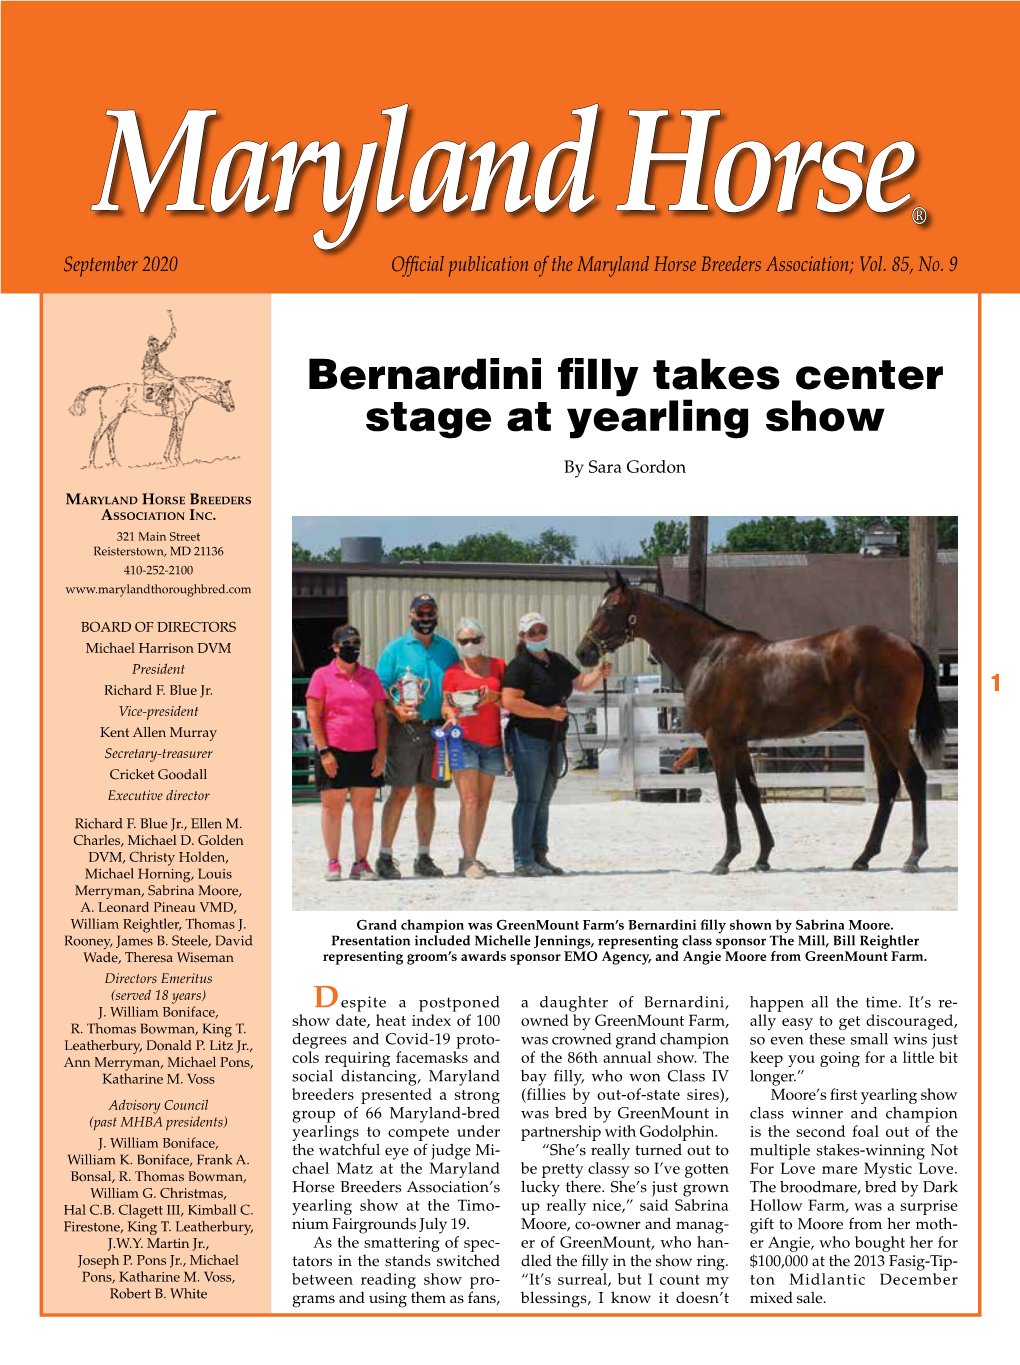 Bernardini Filly Takes Center Stage at Yearling Show